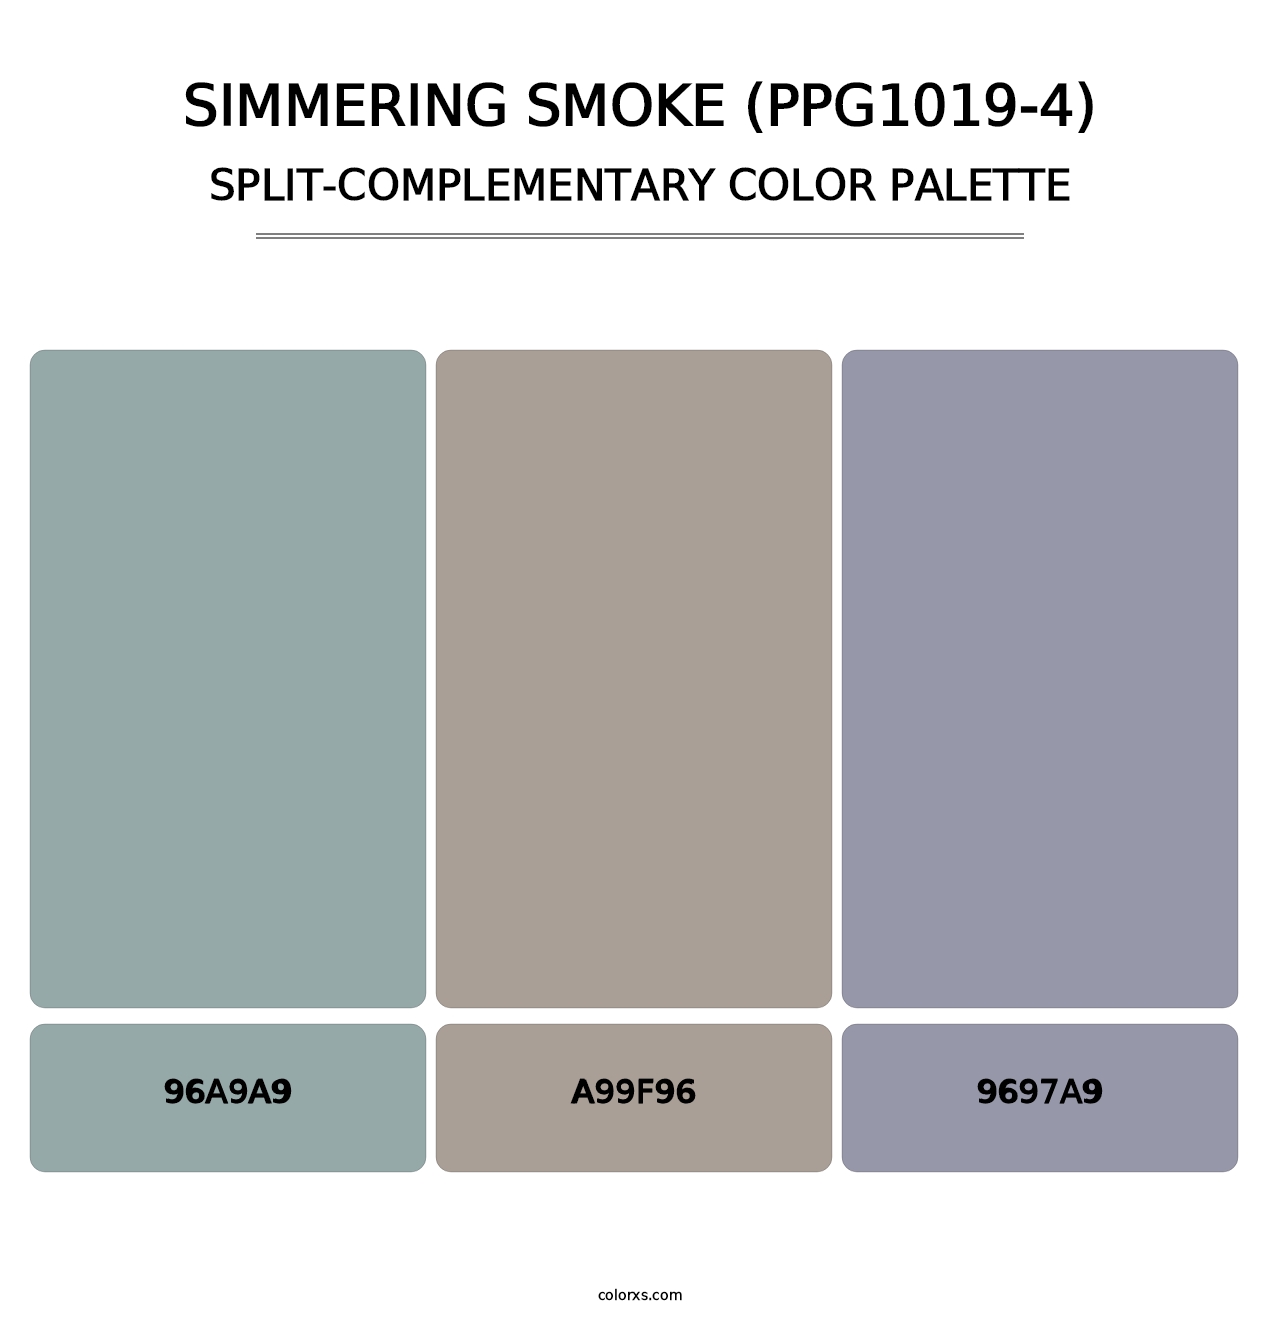 Simmering Smoke (PPG1019-4) - Split-Complementary Color Palette